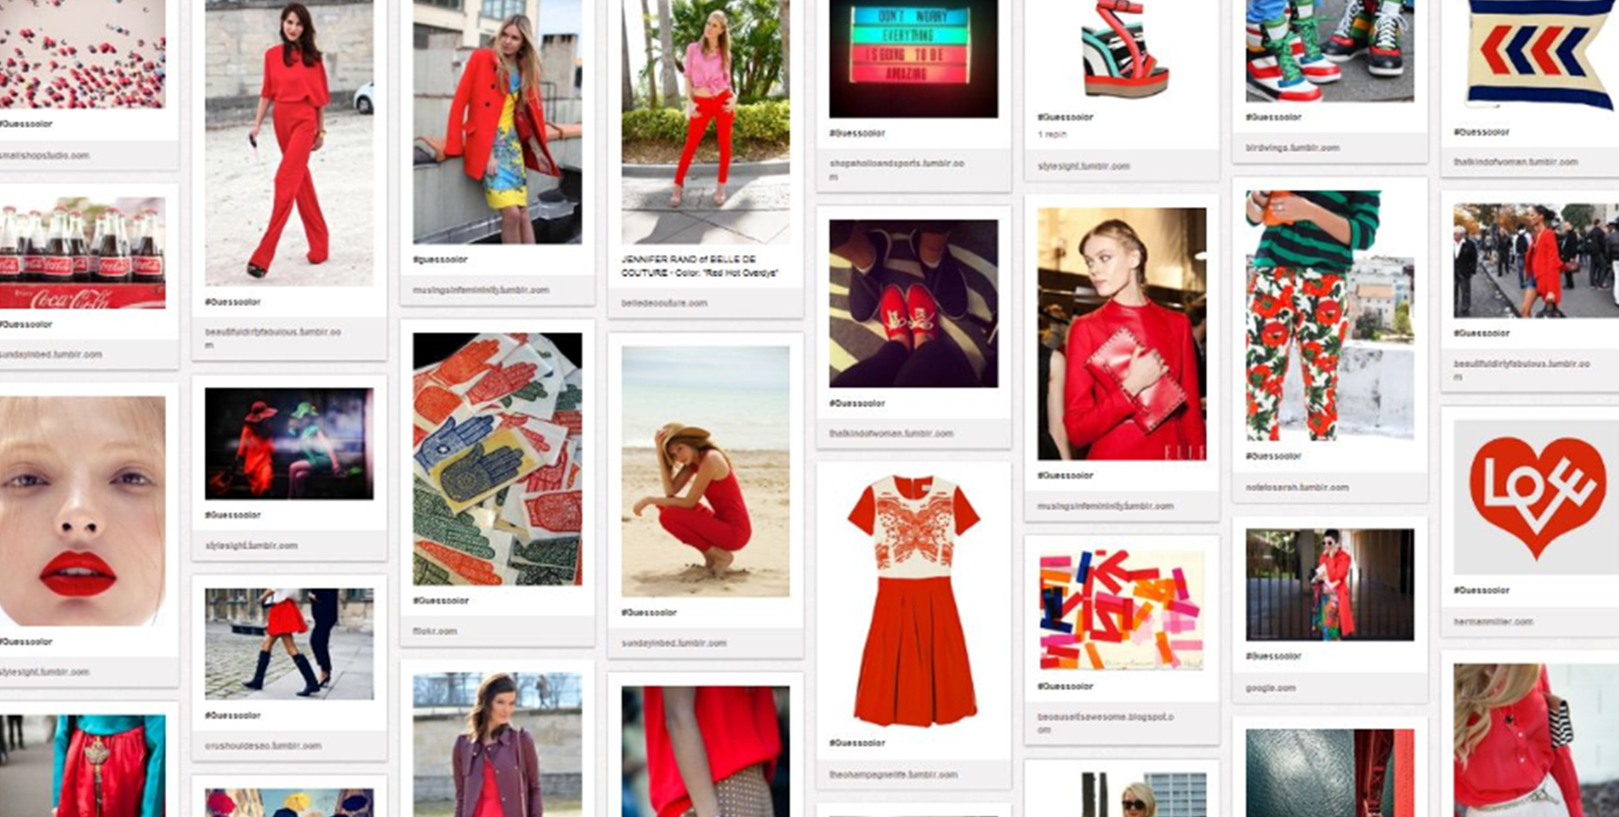 Pins of red clothing/accessories on Pinterest for the "Color Me Inspired" campaign